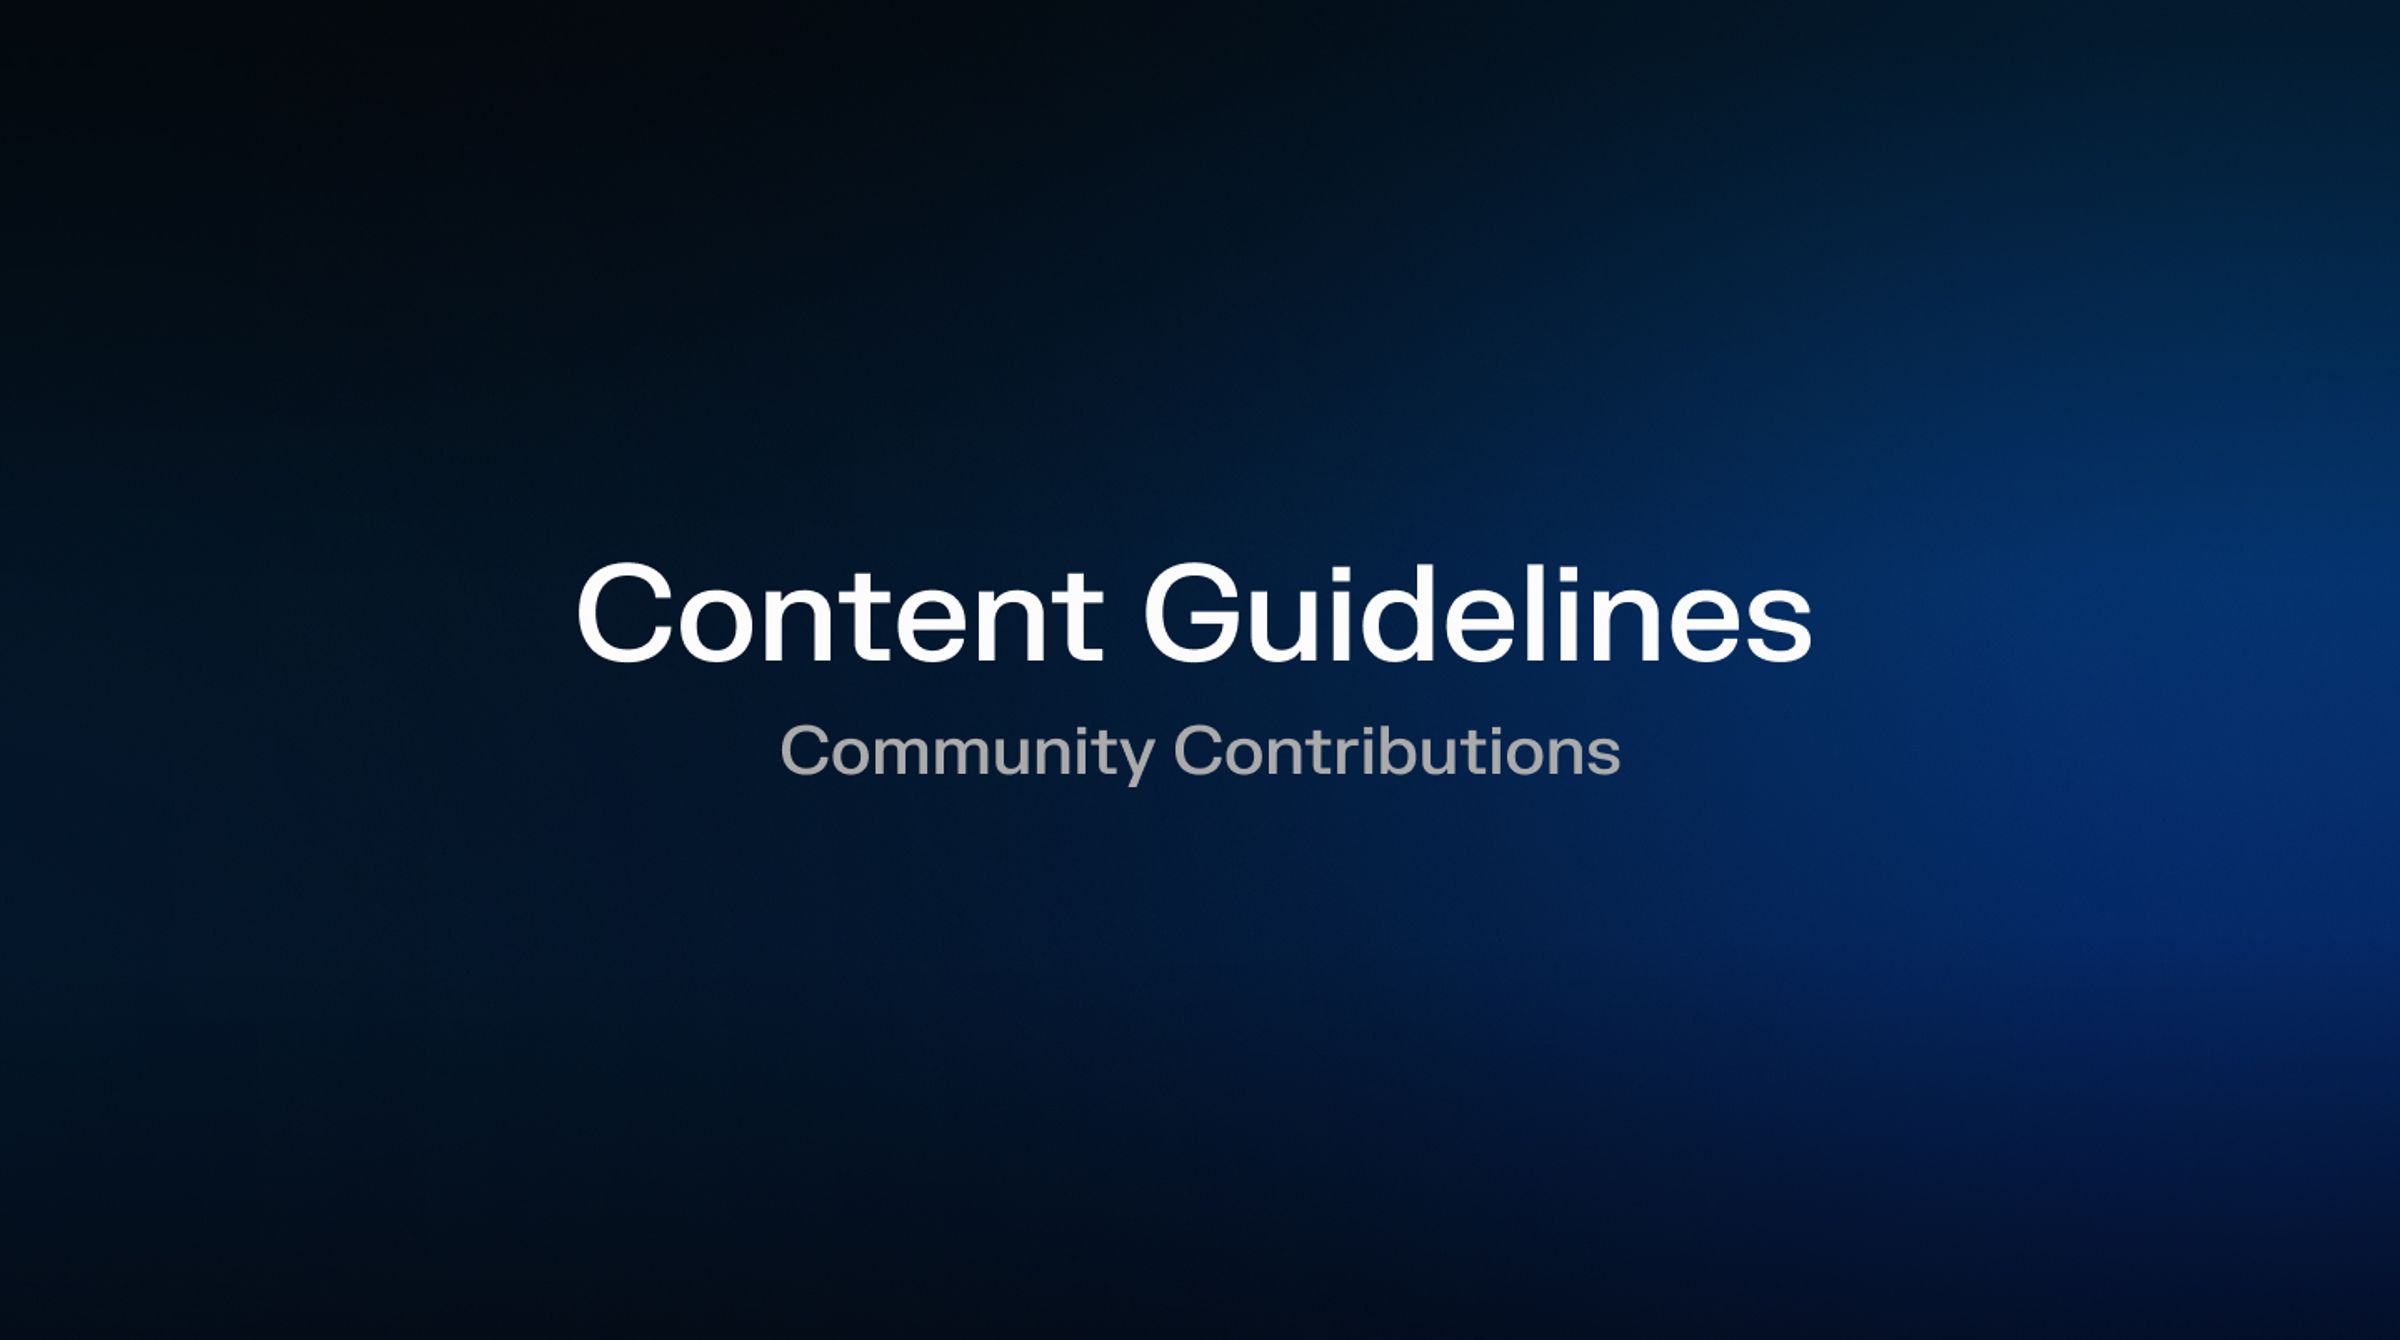 Content Guidelines for Community Contributions